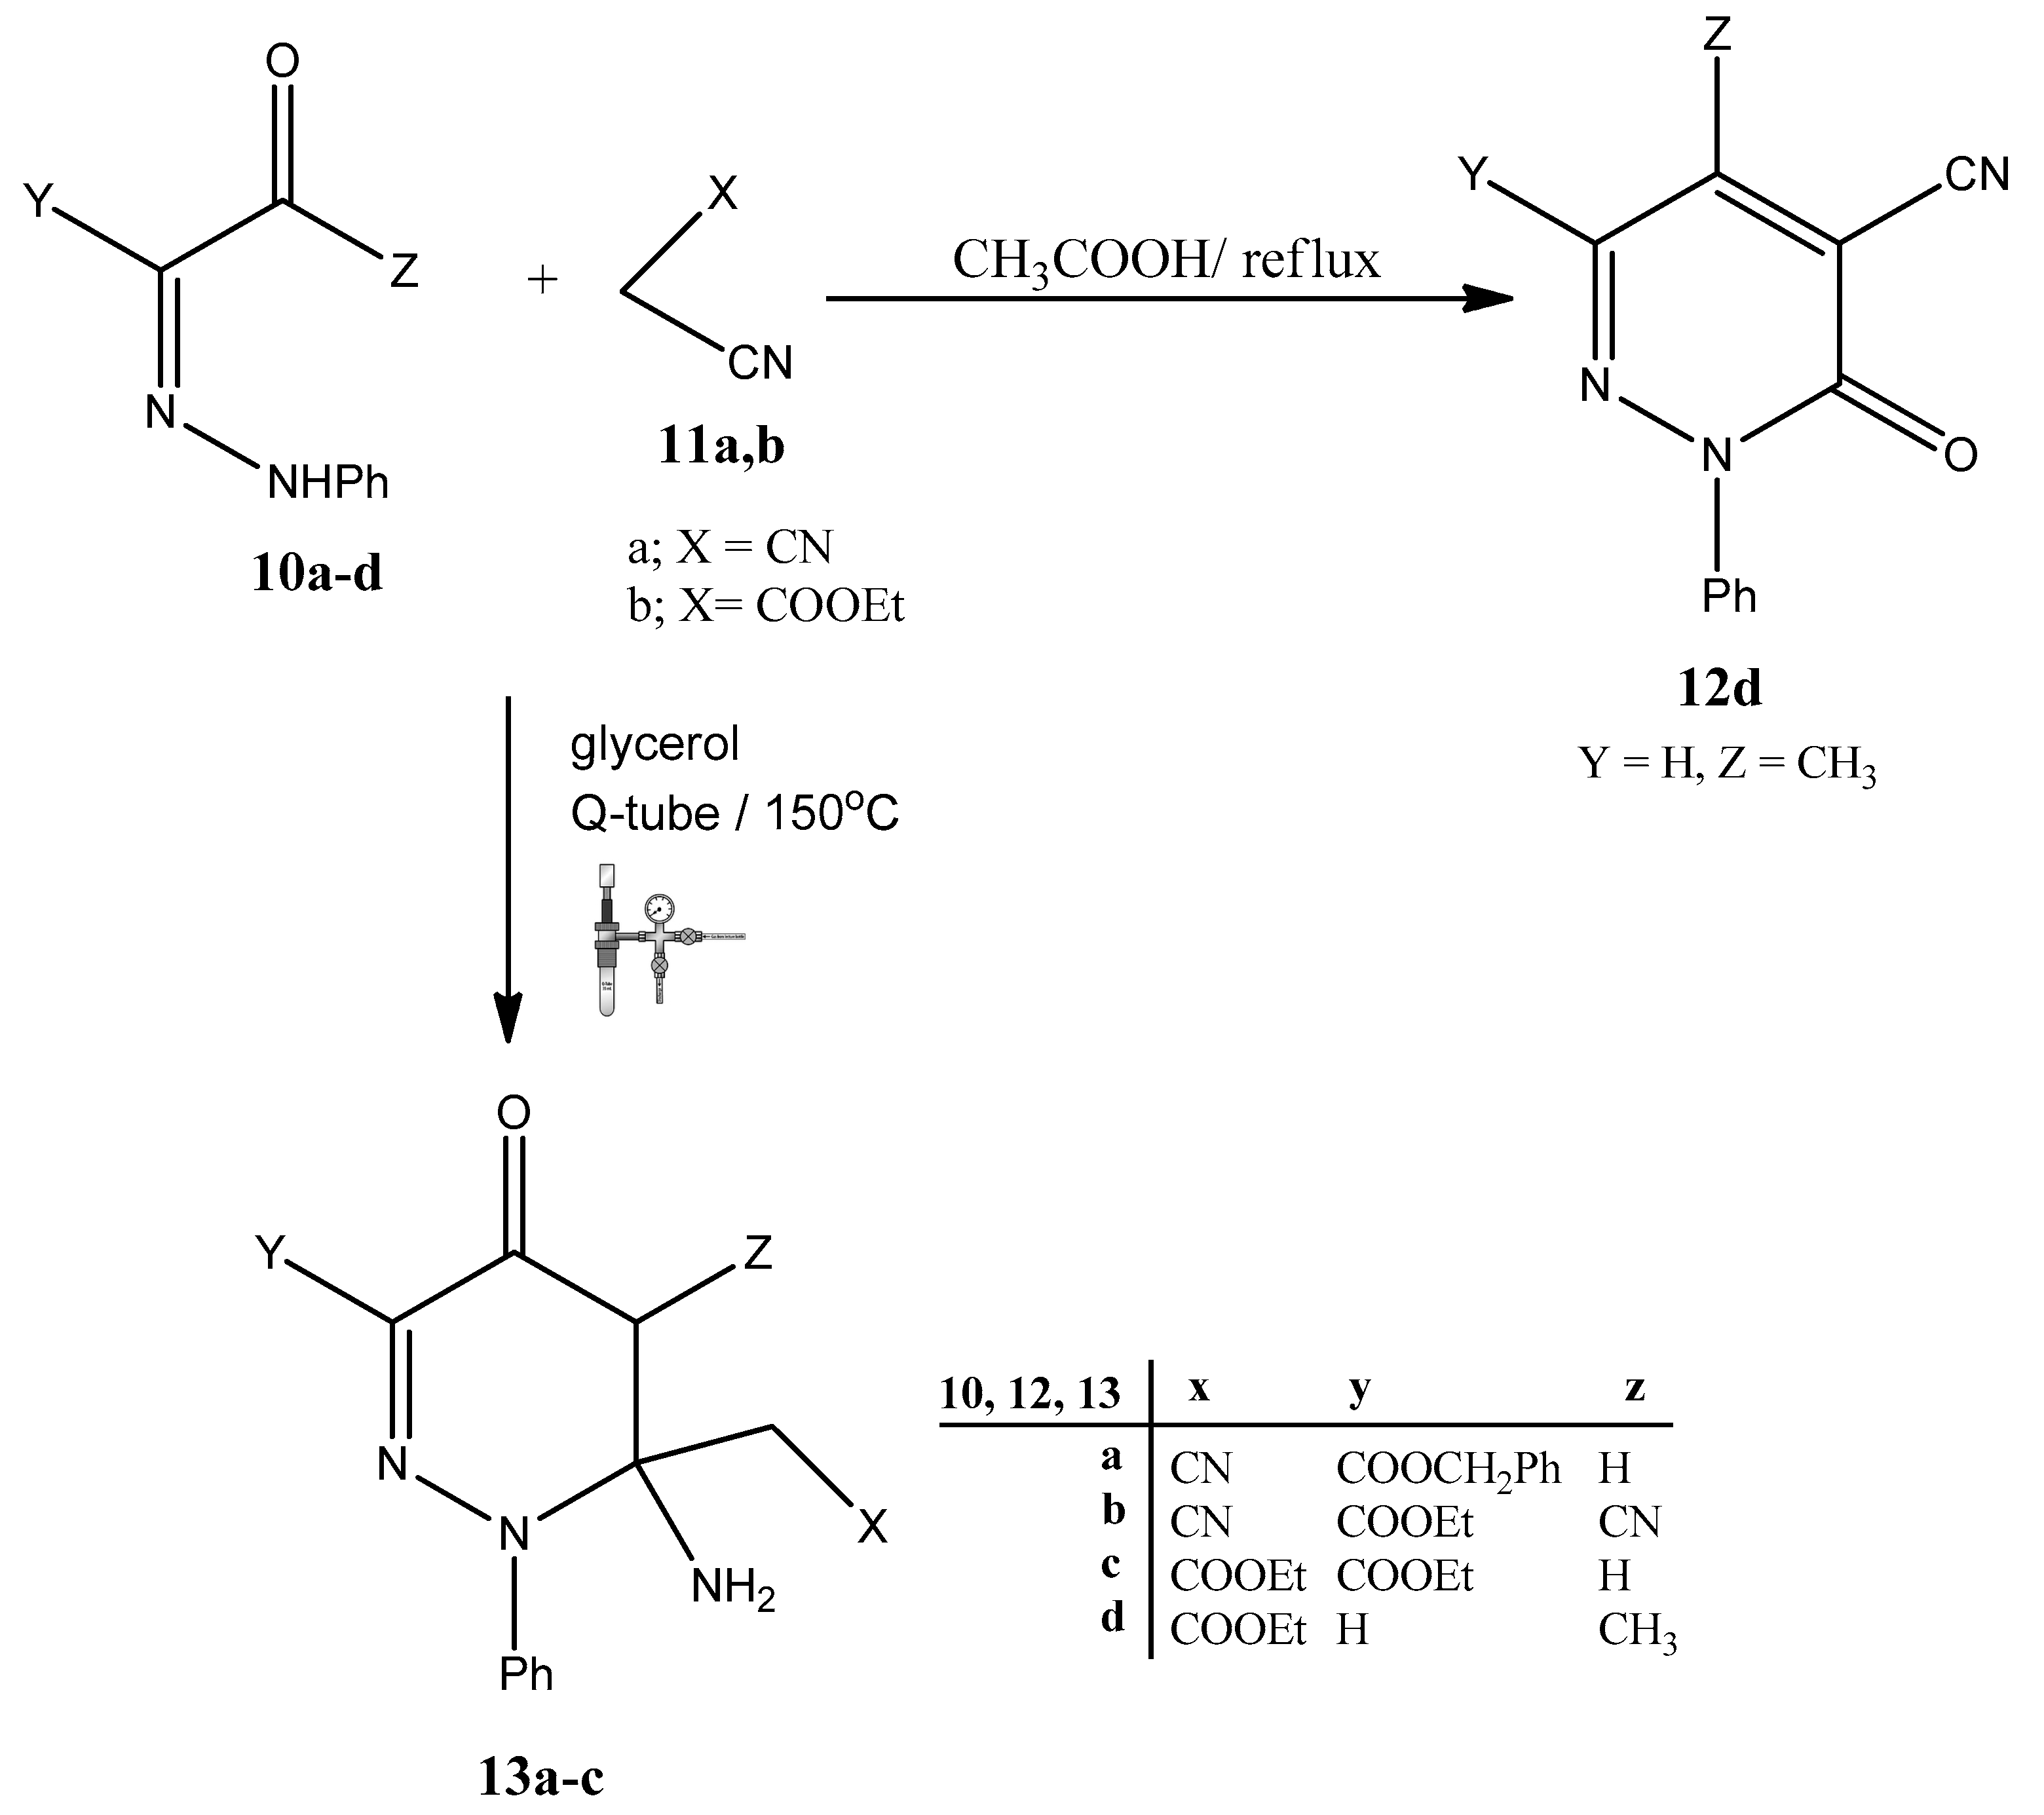 Molecules Free Full Text Glycerol And Q Tubes Green Catalyst And Technique For Synthesis Of Polyfunctionally Substituted Heteroaromatics And Anilines Html